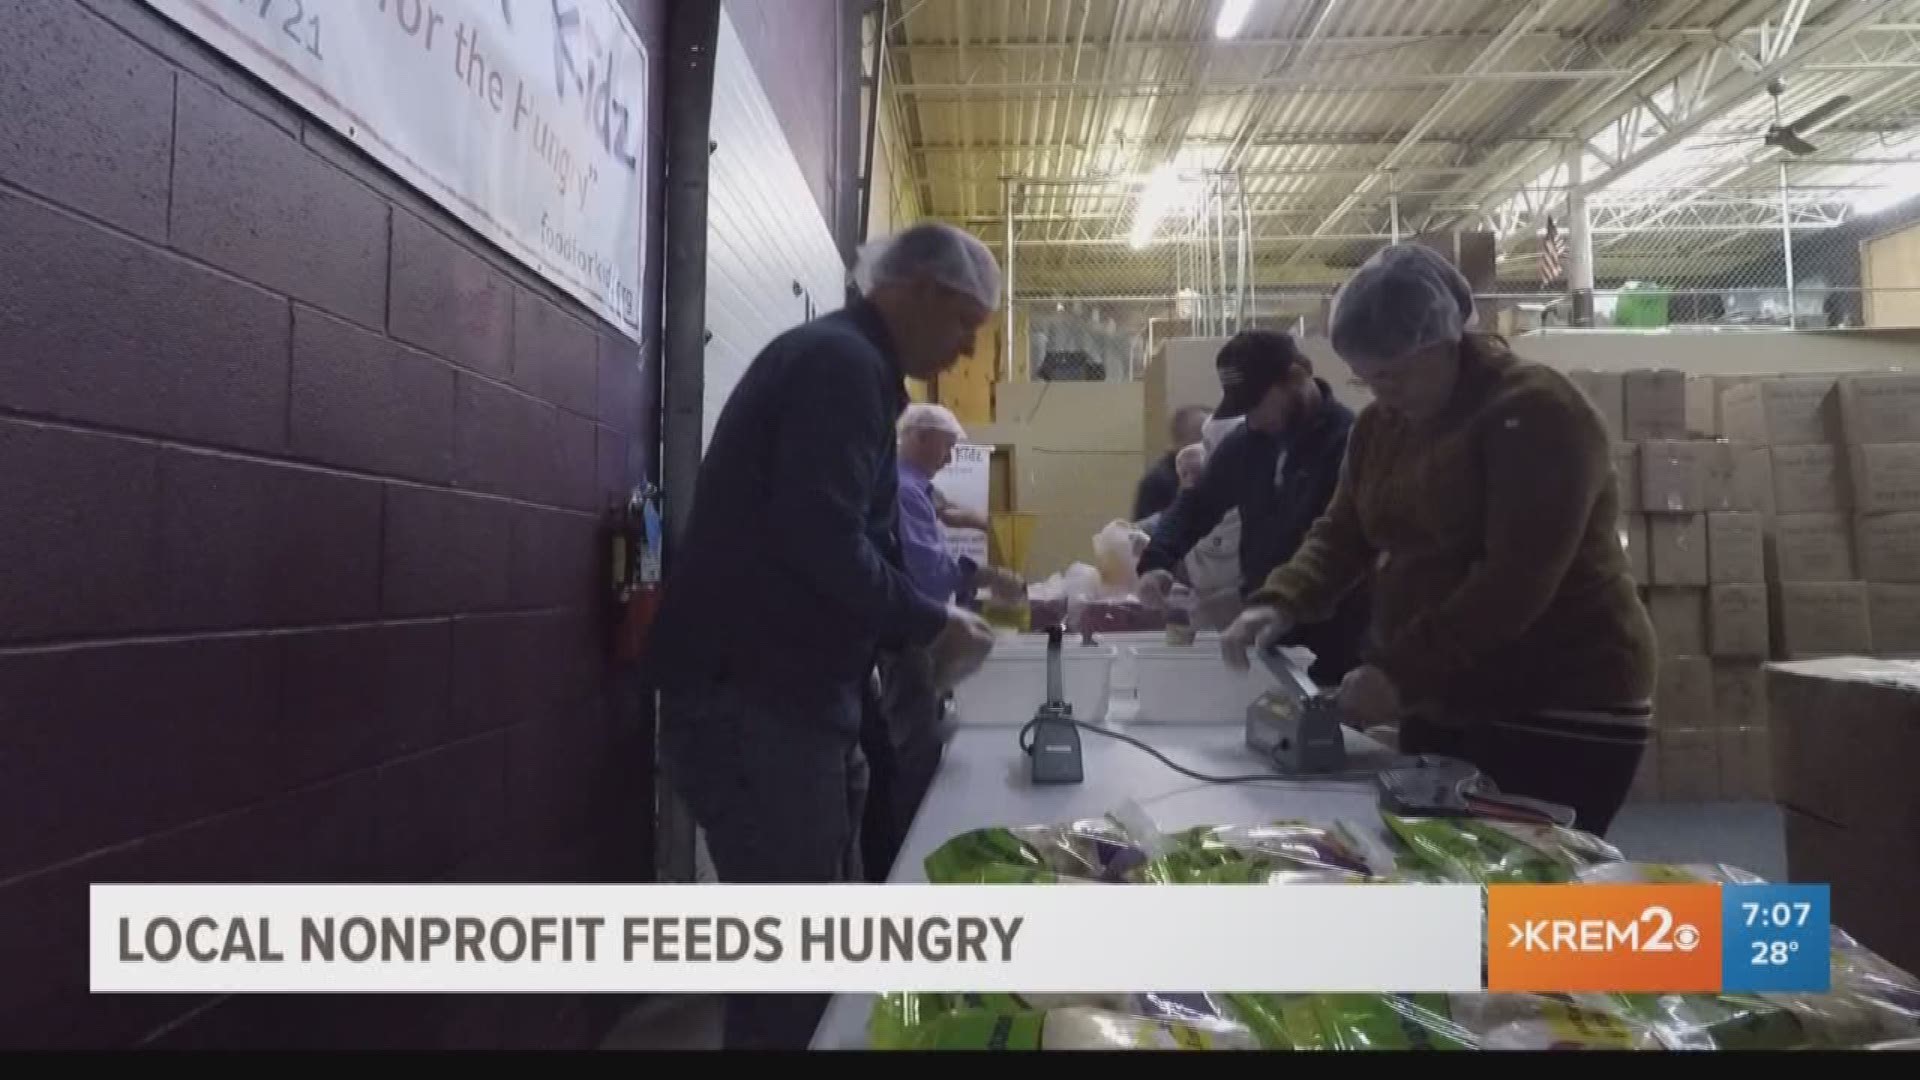 KREM 2 Reporter Kierra Elfalan spoke with volunteers with Food For Kidz, which just opened up a branch in Spokane Valley to help feed kids in the Inland Northwest.